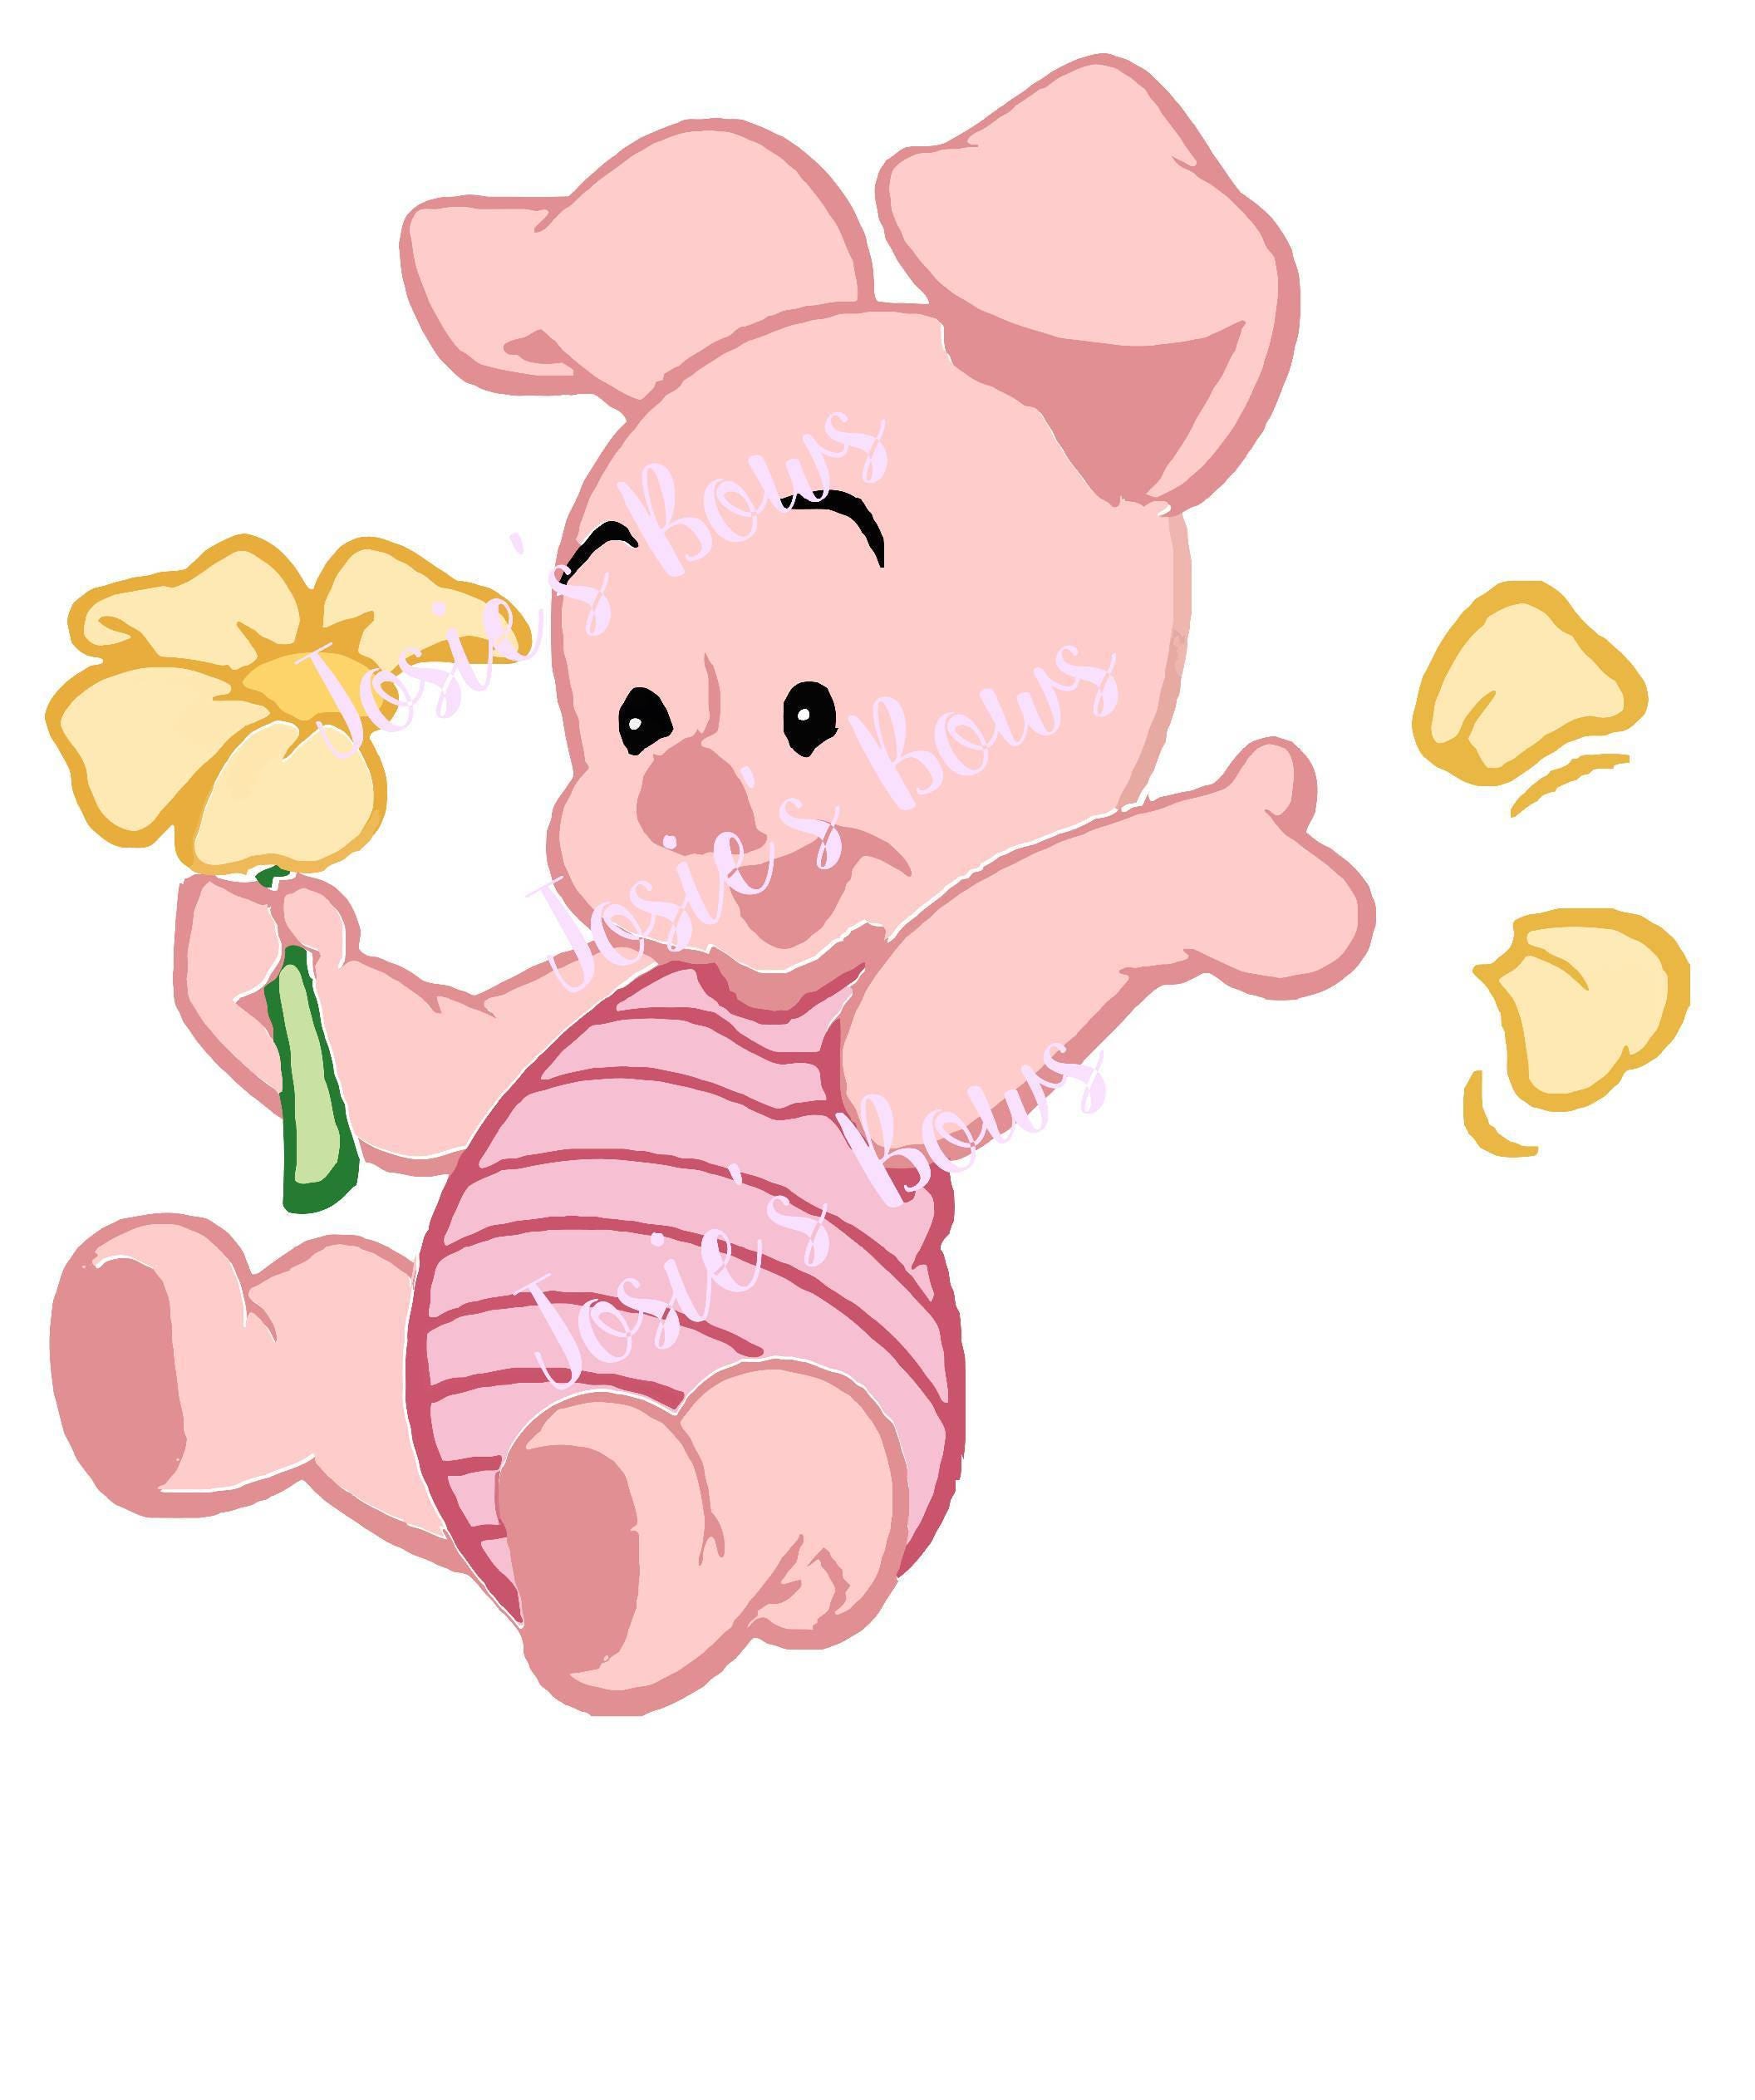 Inspired BY Piglet from Winnie the Pooh Eeyore Piglet & Tiger Etsy